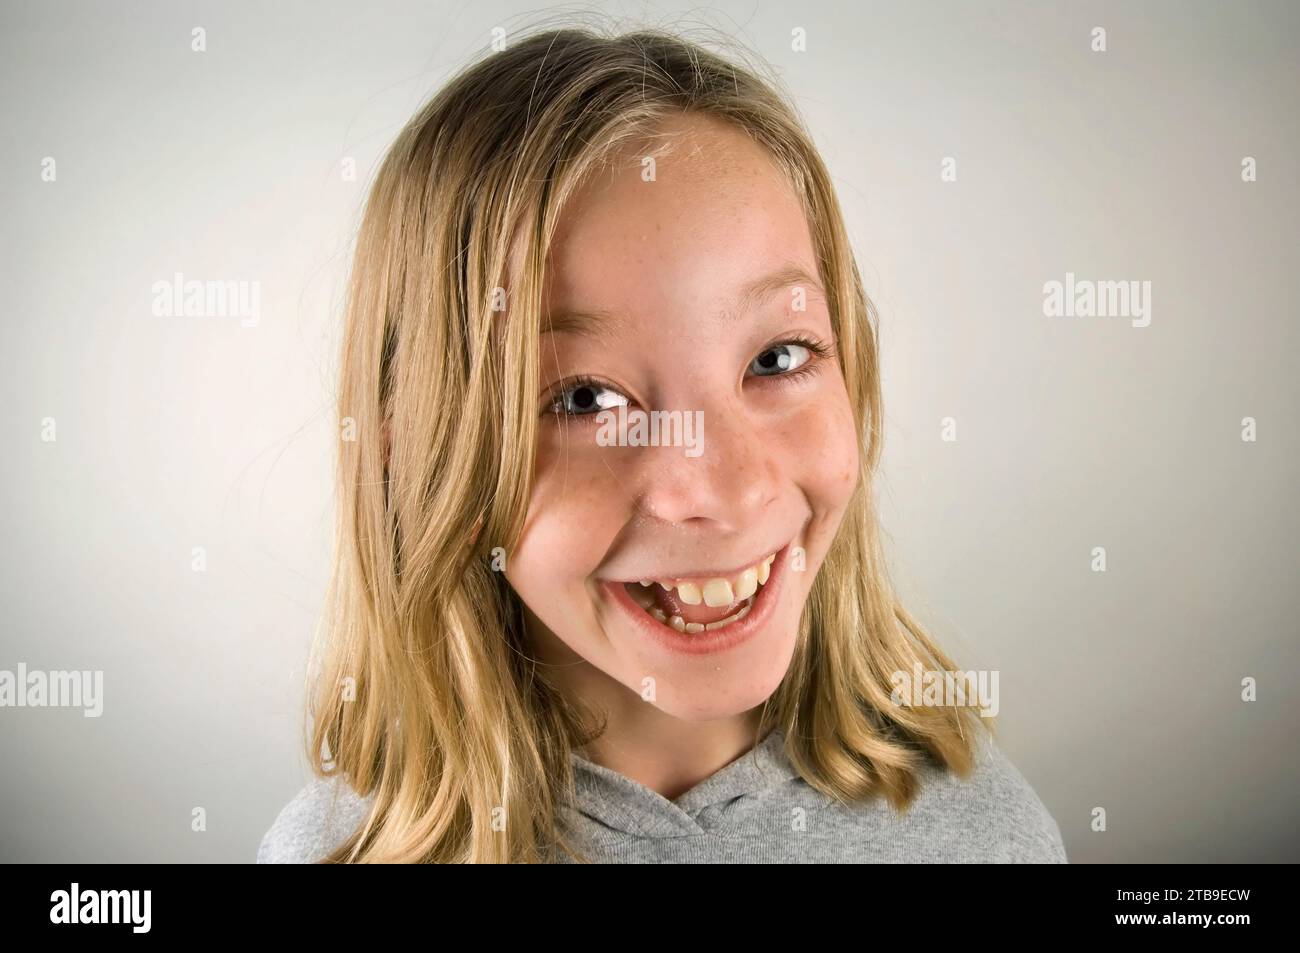 Portrait of a young girl giving a big smile to the camera, with blond hair and blue eyes against a grey background; Studio Stock Photo